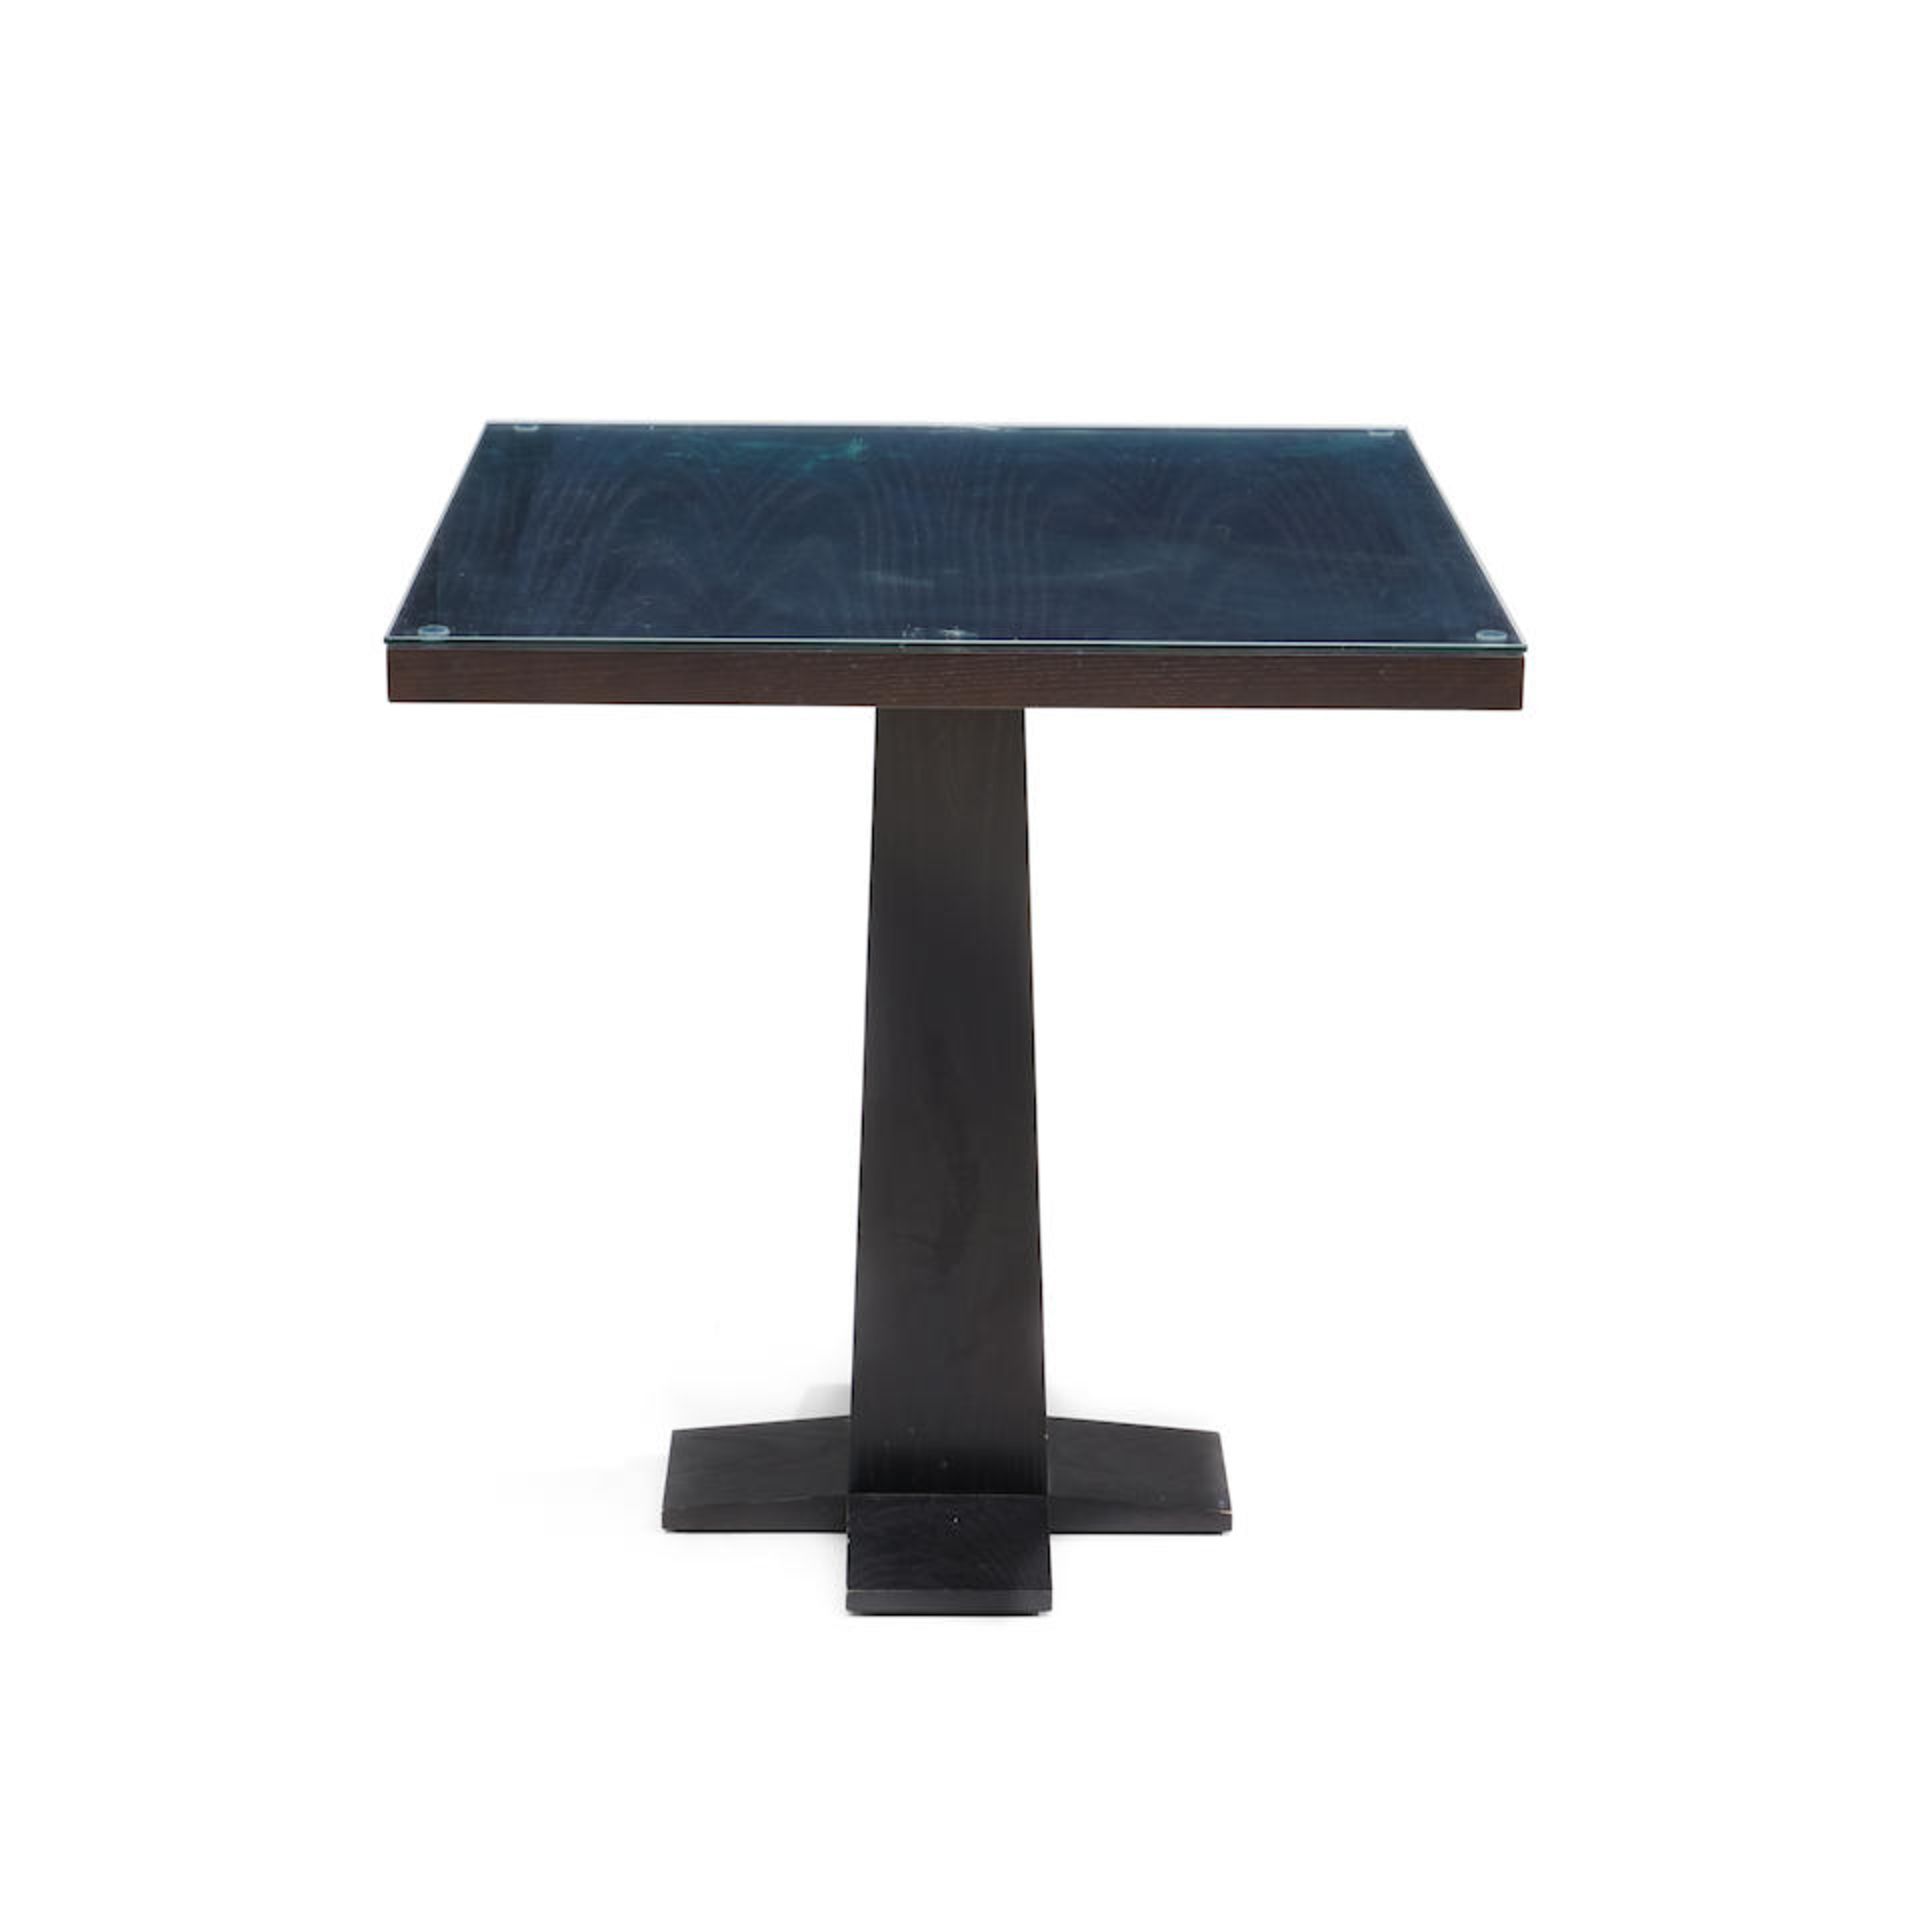 Ebonized-oak Pedestal Dining Table with Glass Top Late 20th/early 21st century, unmarked, ht. 30...